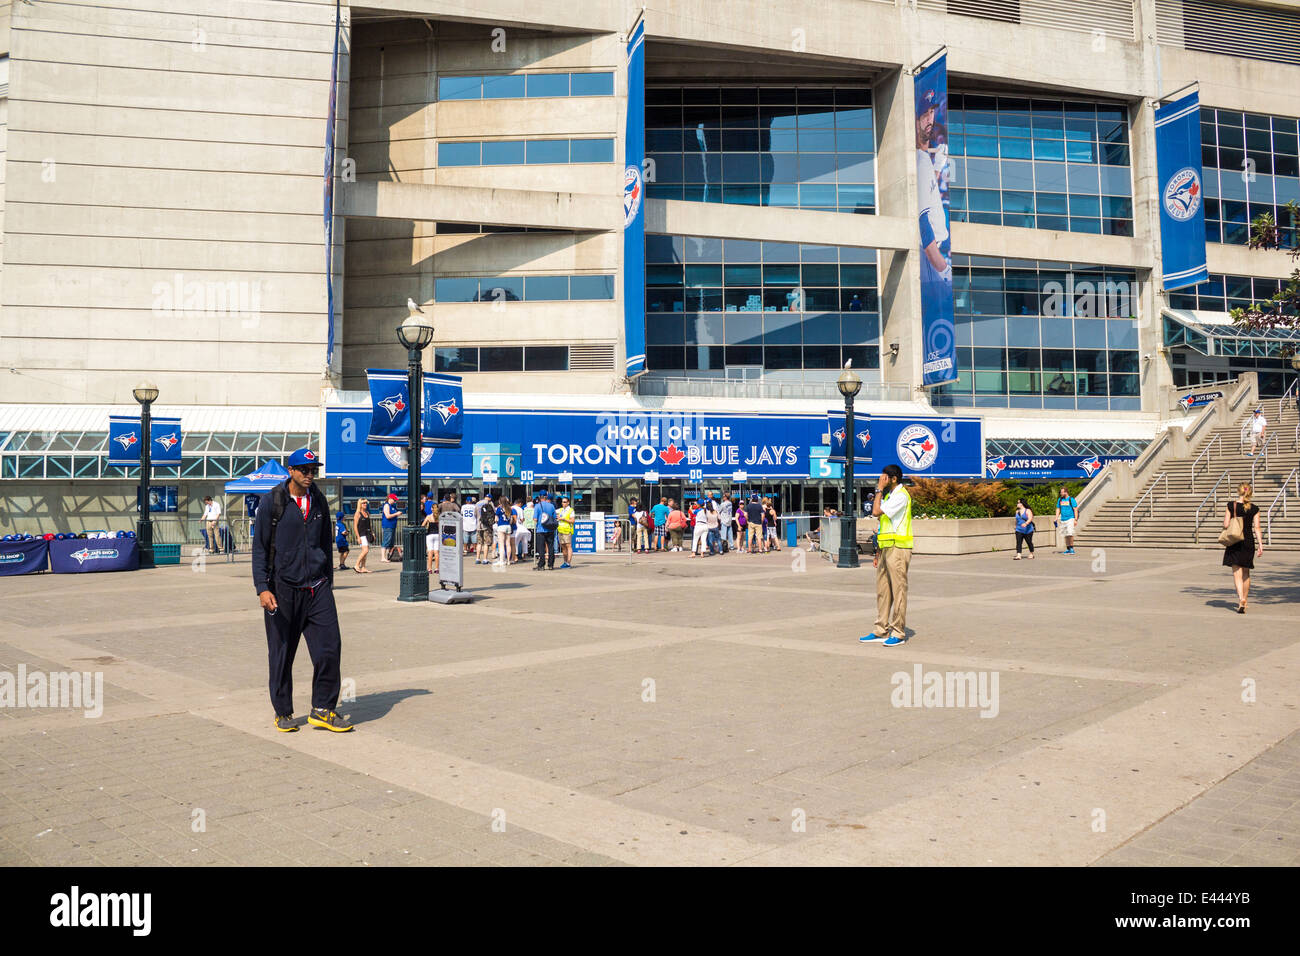 People walking around outside the Rogers Centre before a Toronto Blue Jay's baseball game on a sunny summer day Stock Photo